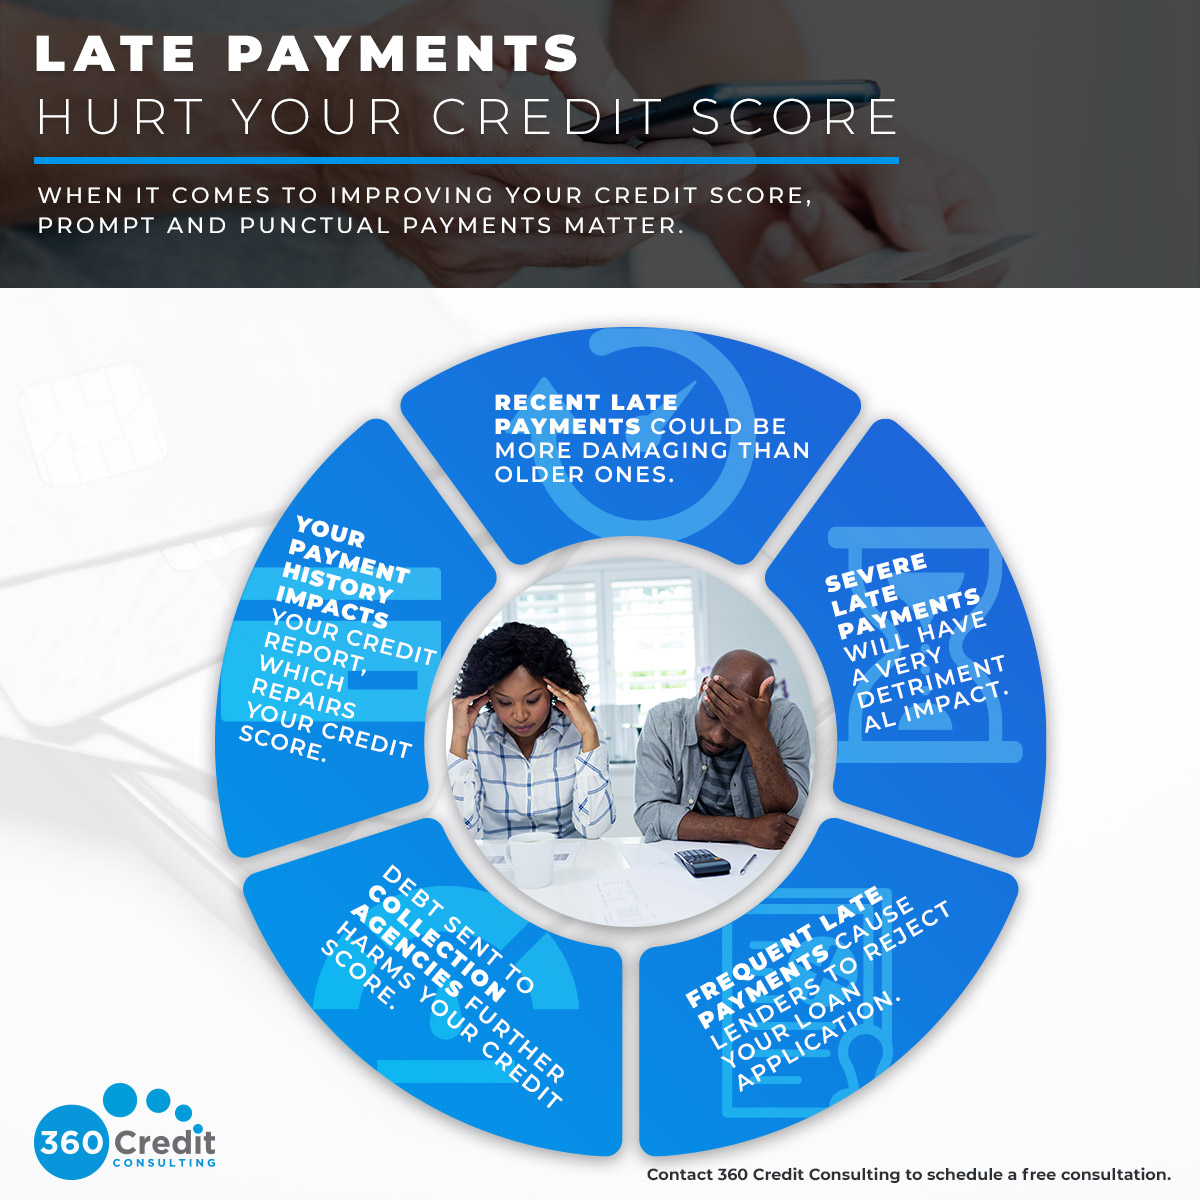 How Long Do Late Payments Stay on a Credit Report?